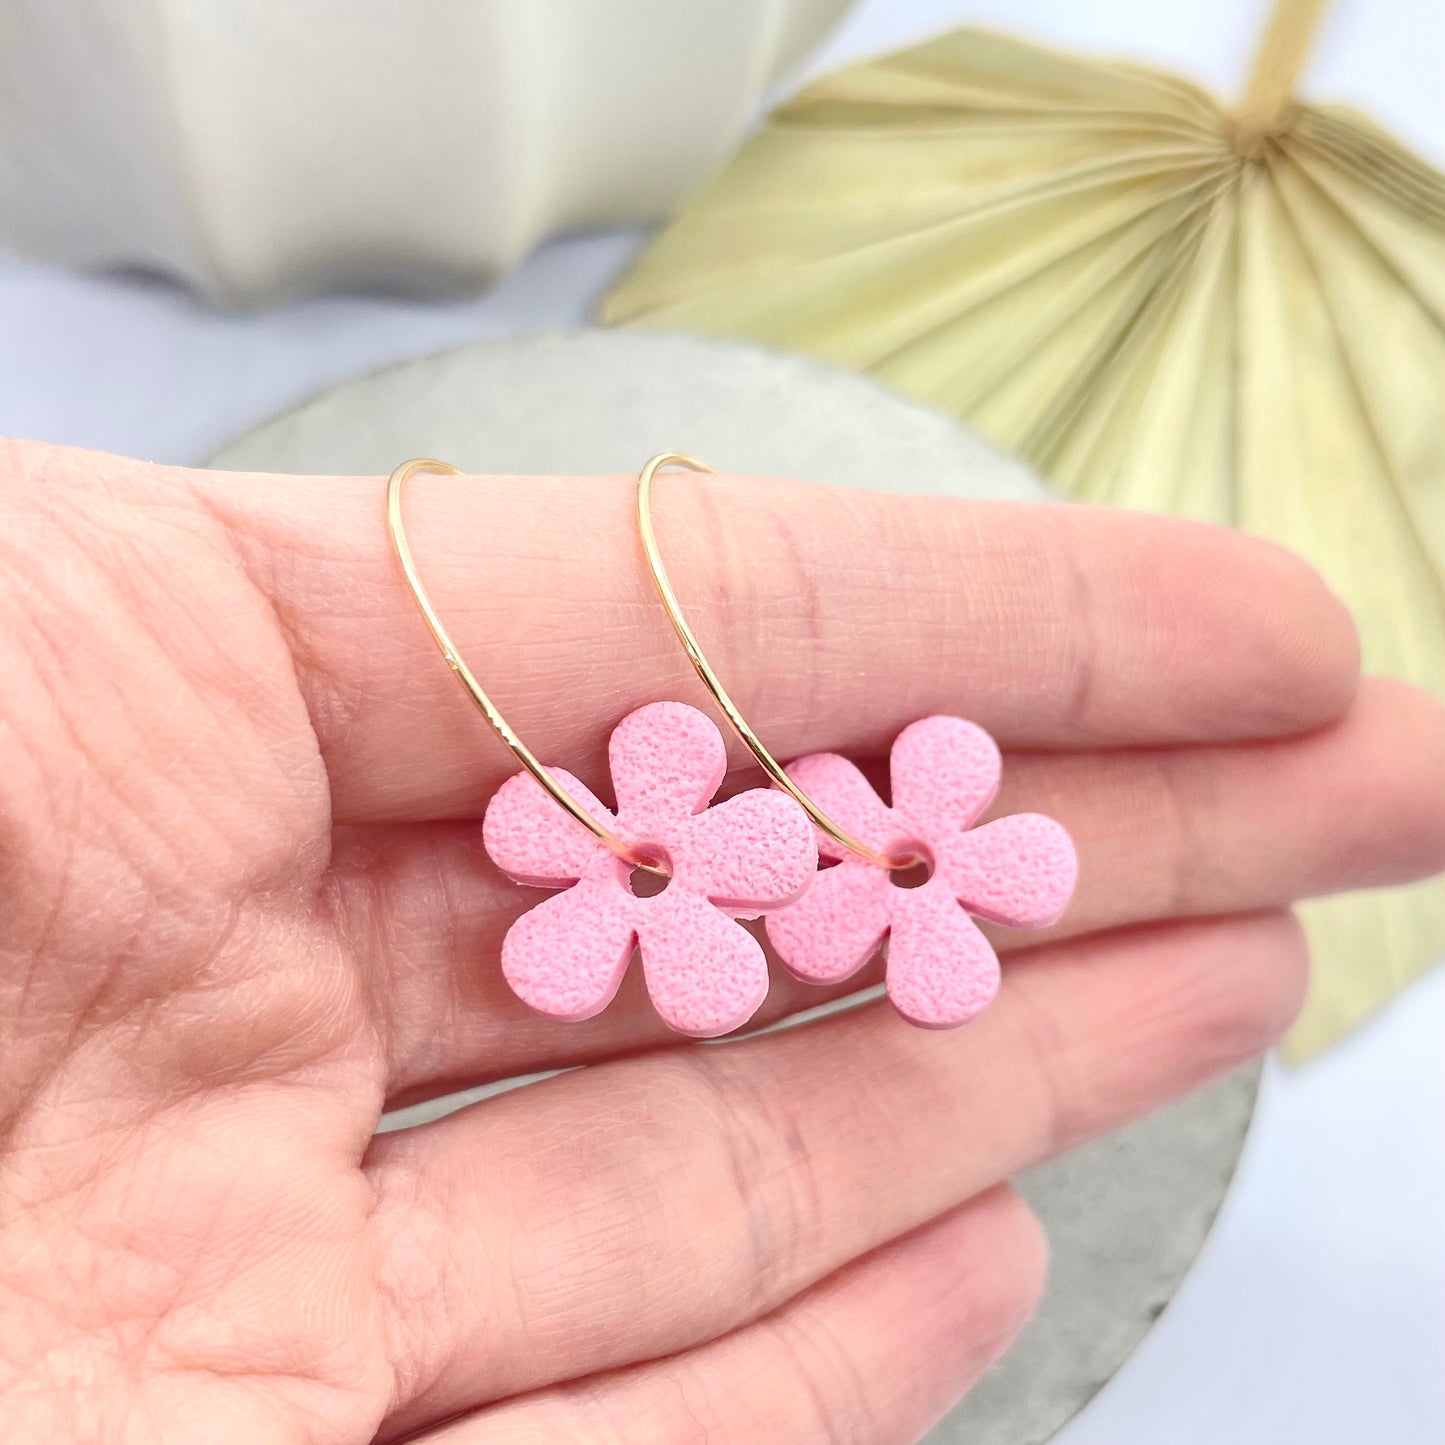 Handmade, bright pink flower polymer clay earrings on a 25mm gold coloured hoop